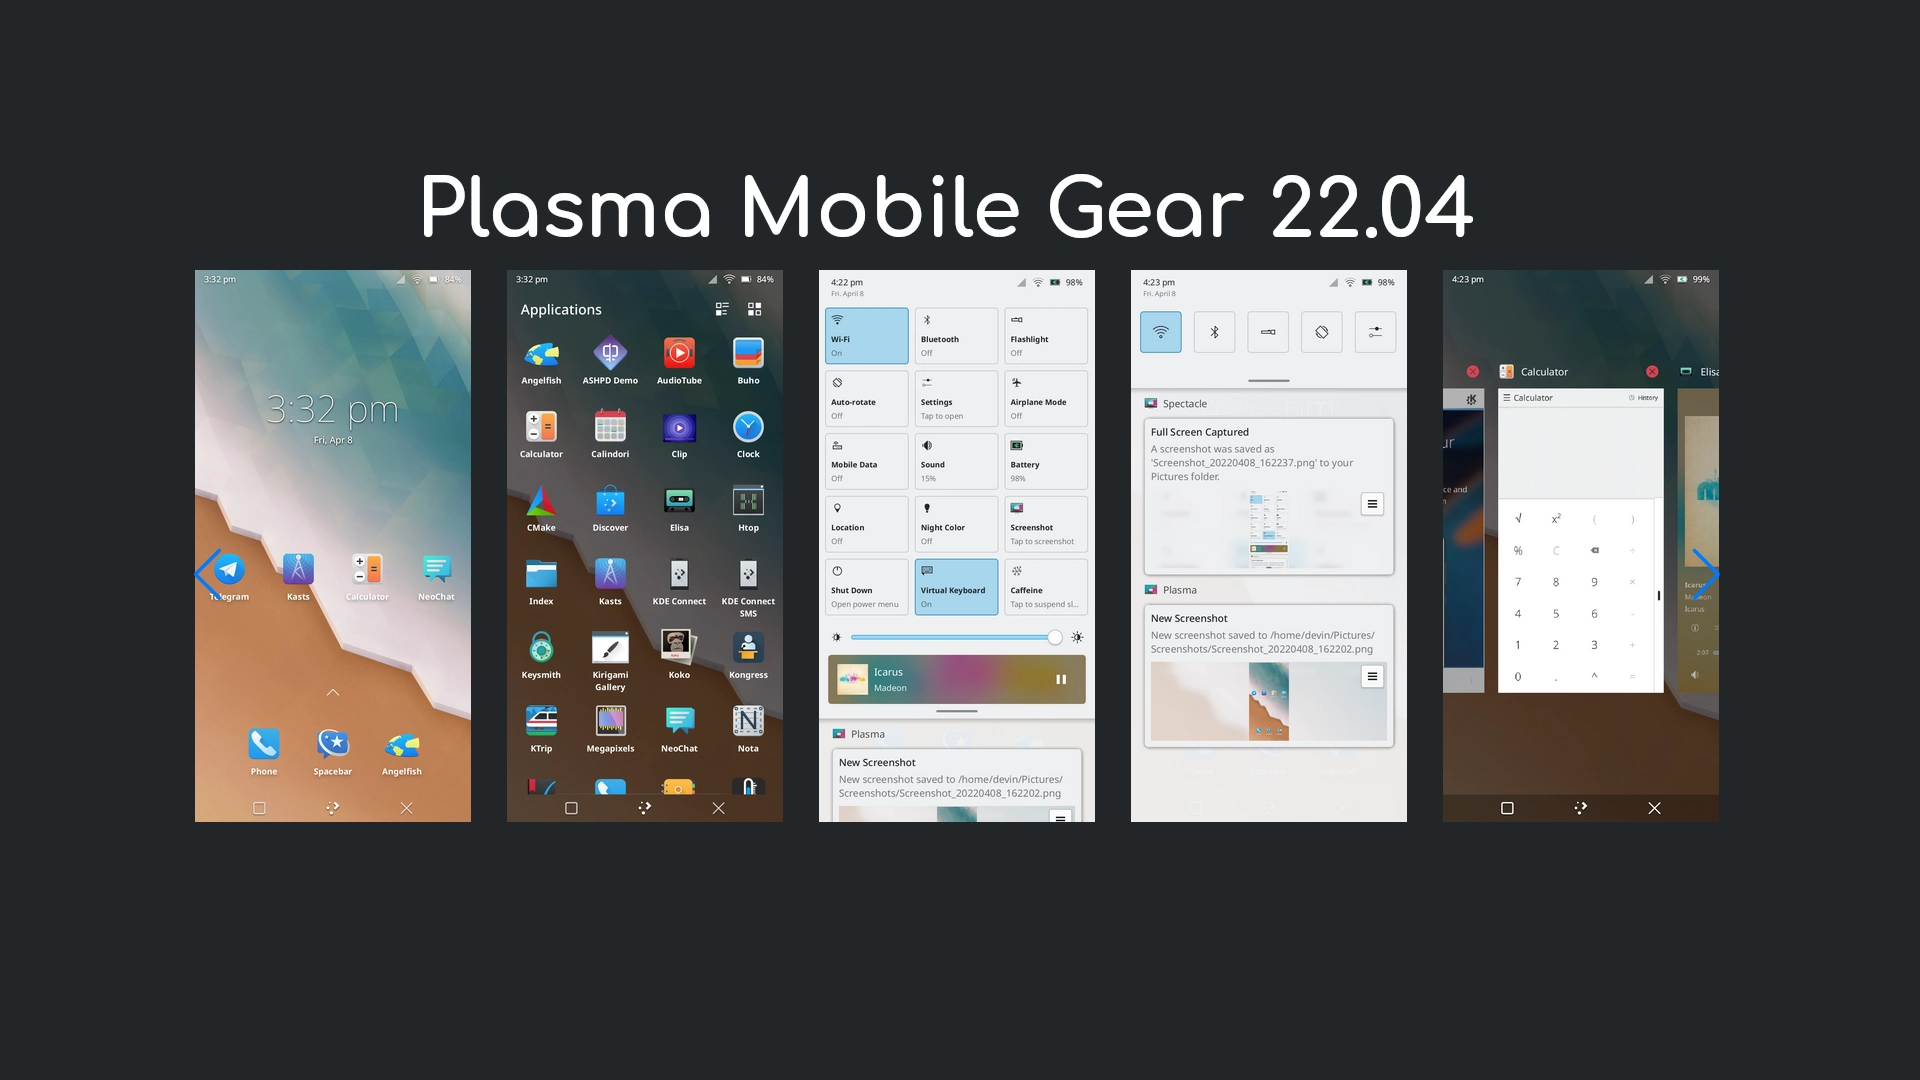 KDE Releases Plasma Mobile Gear 22.04 with Lots of Goodies for Linux Phone Users